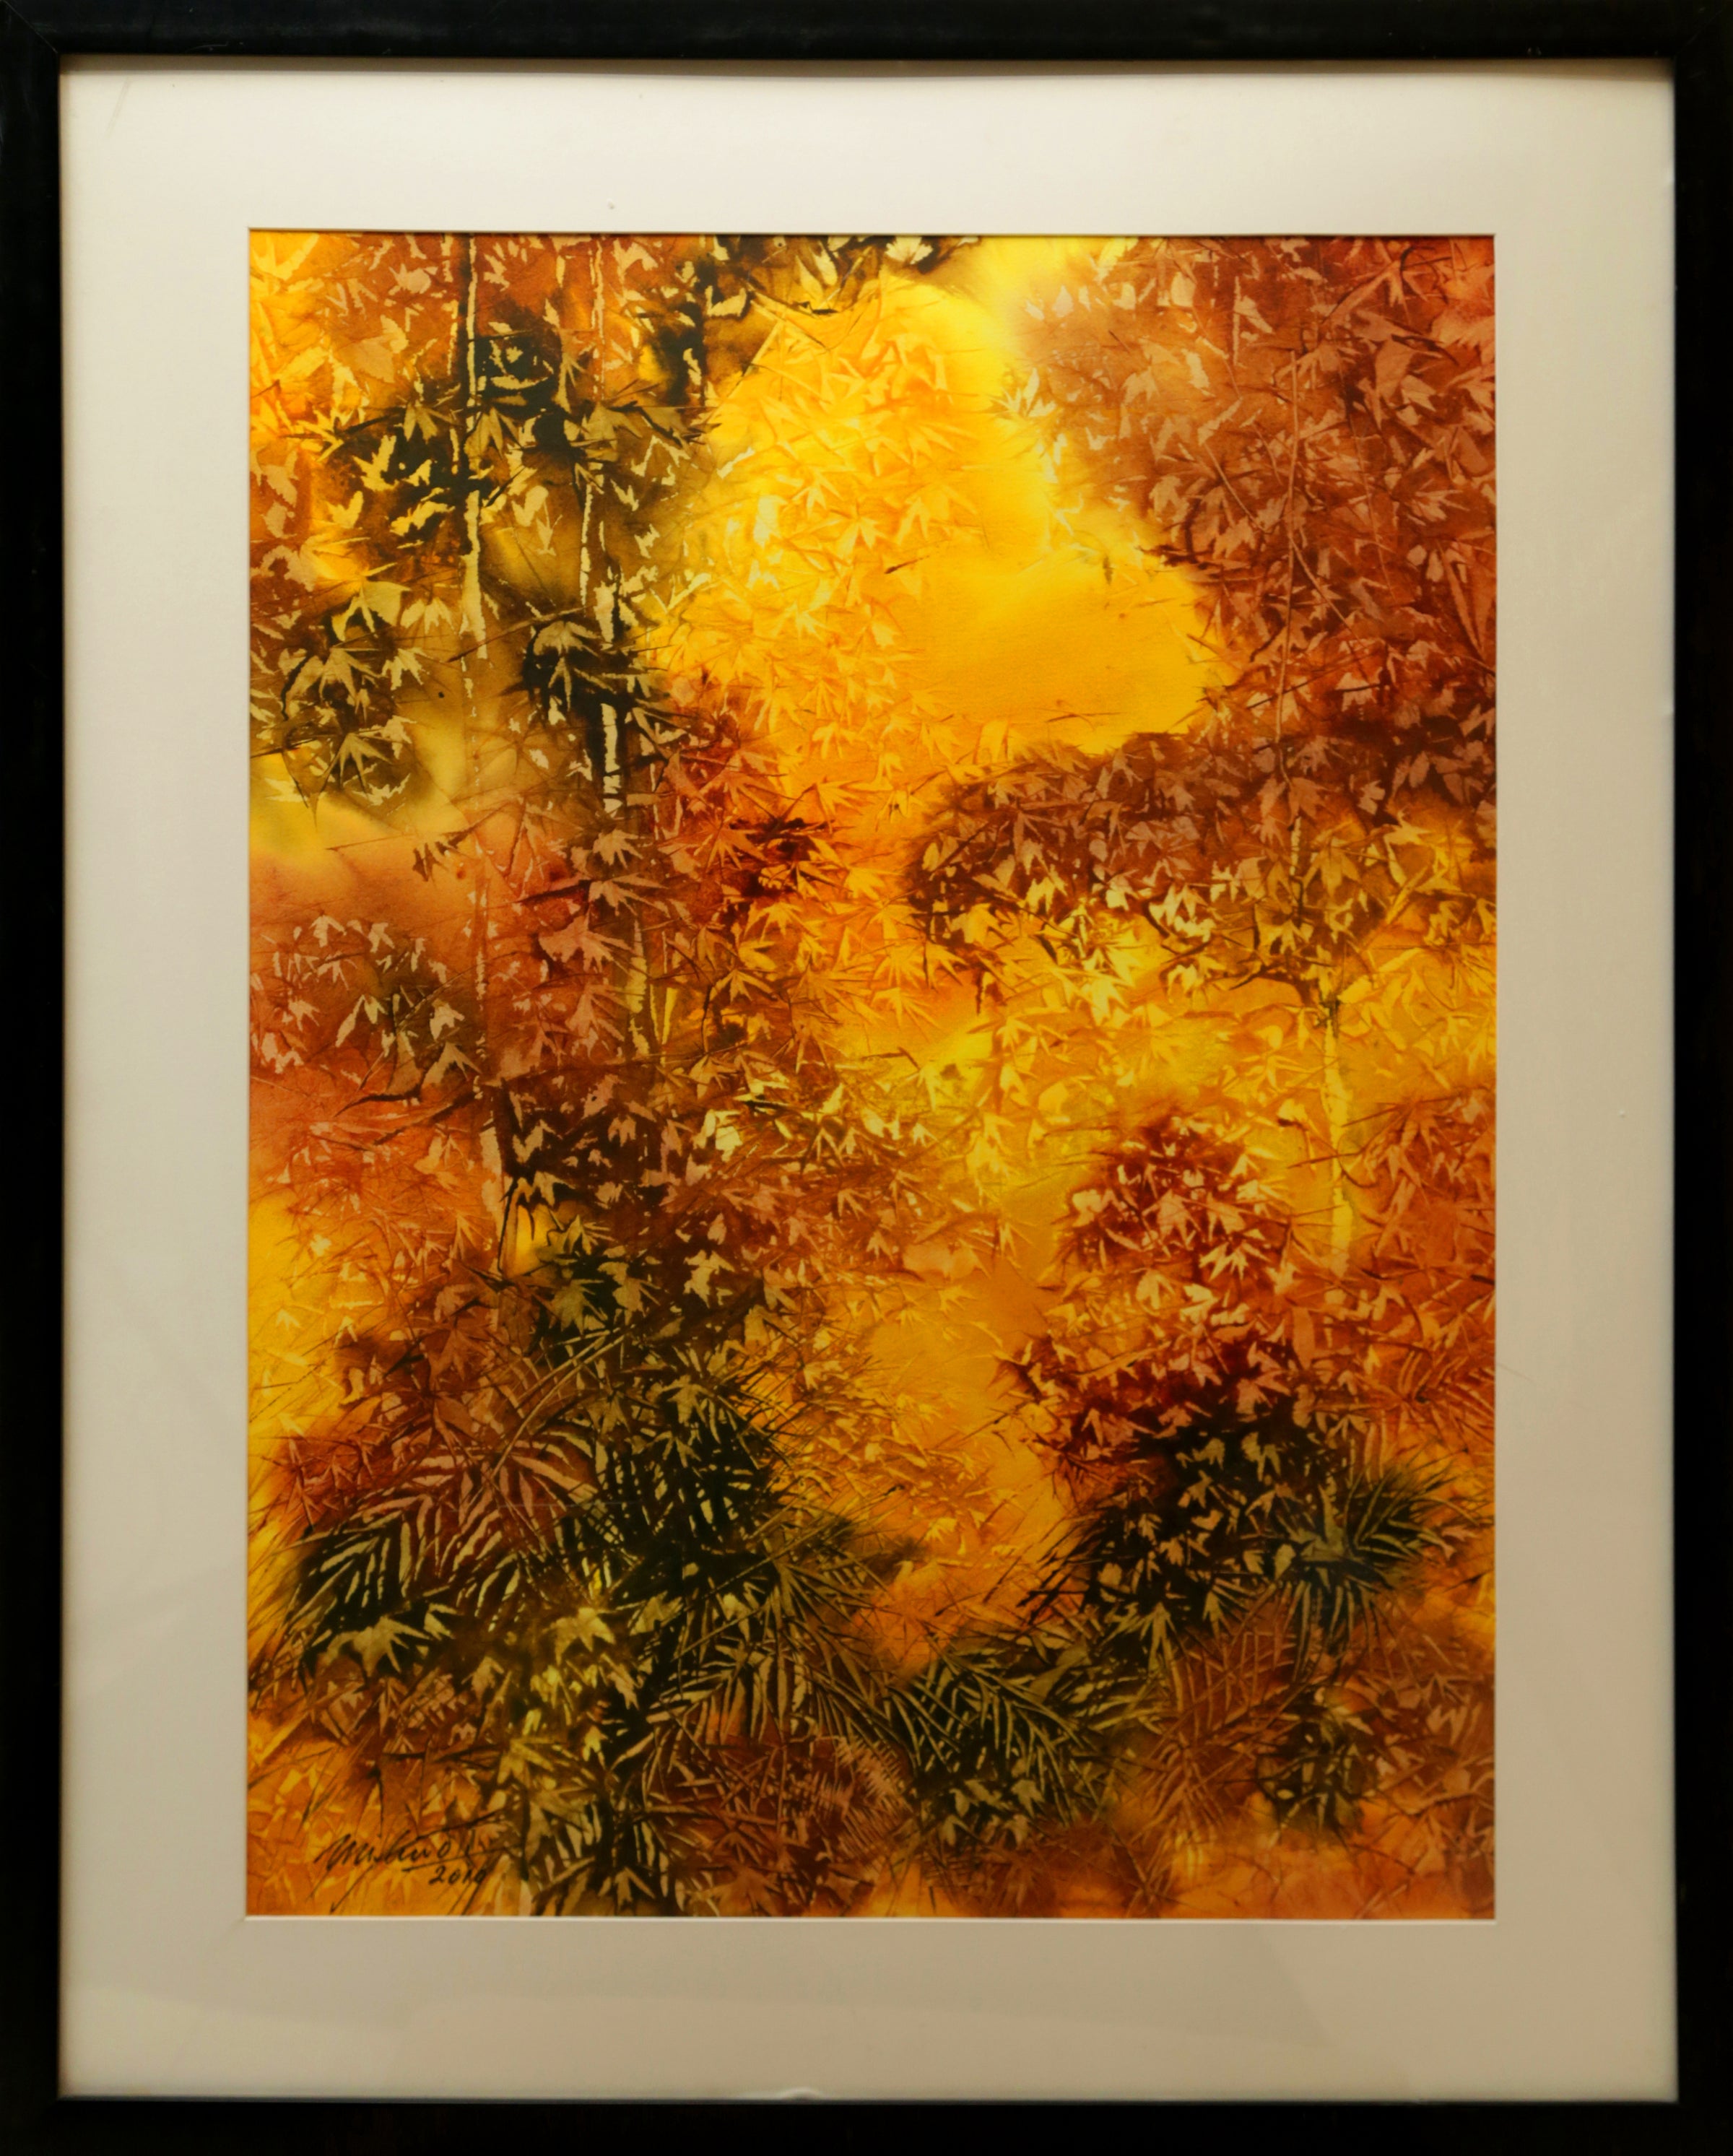 SCATTERED LEAVES by Milind Nayak | Water colour artwork on paper